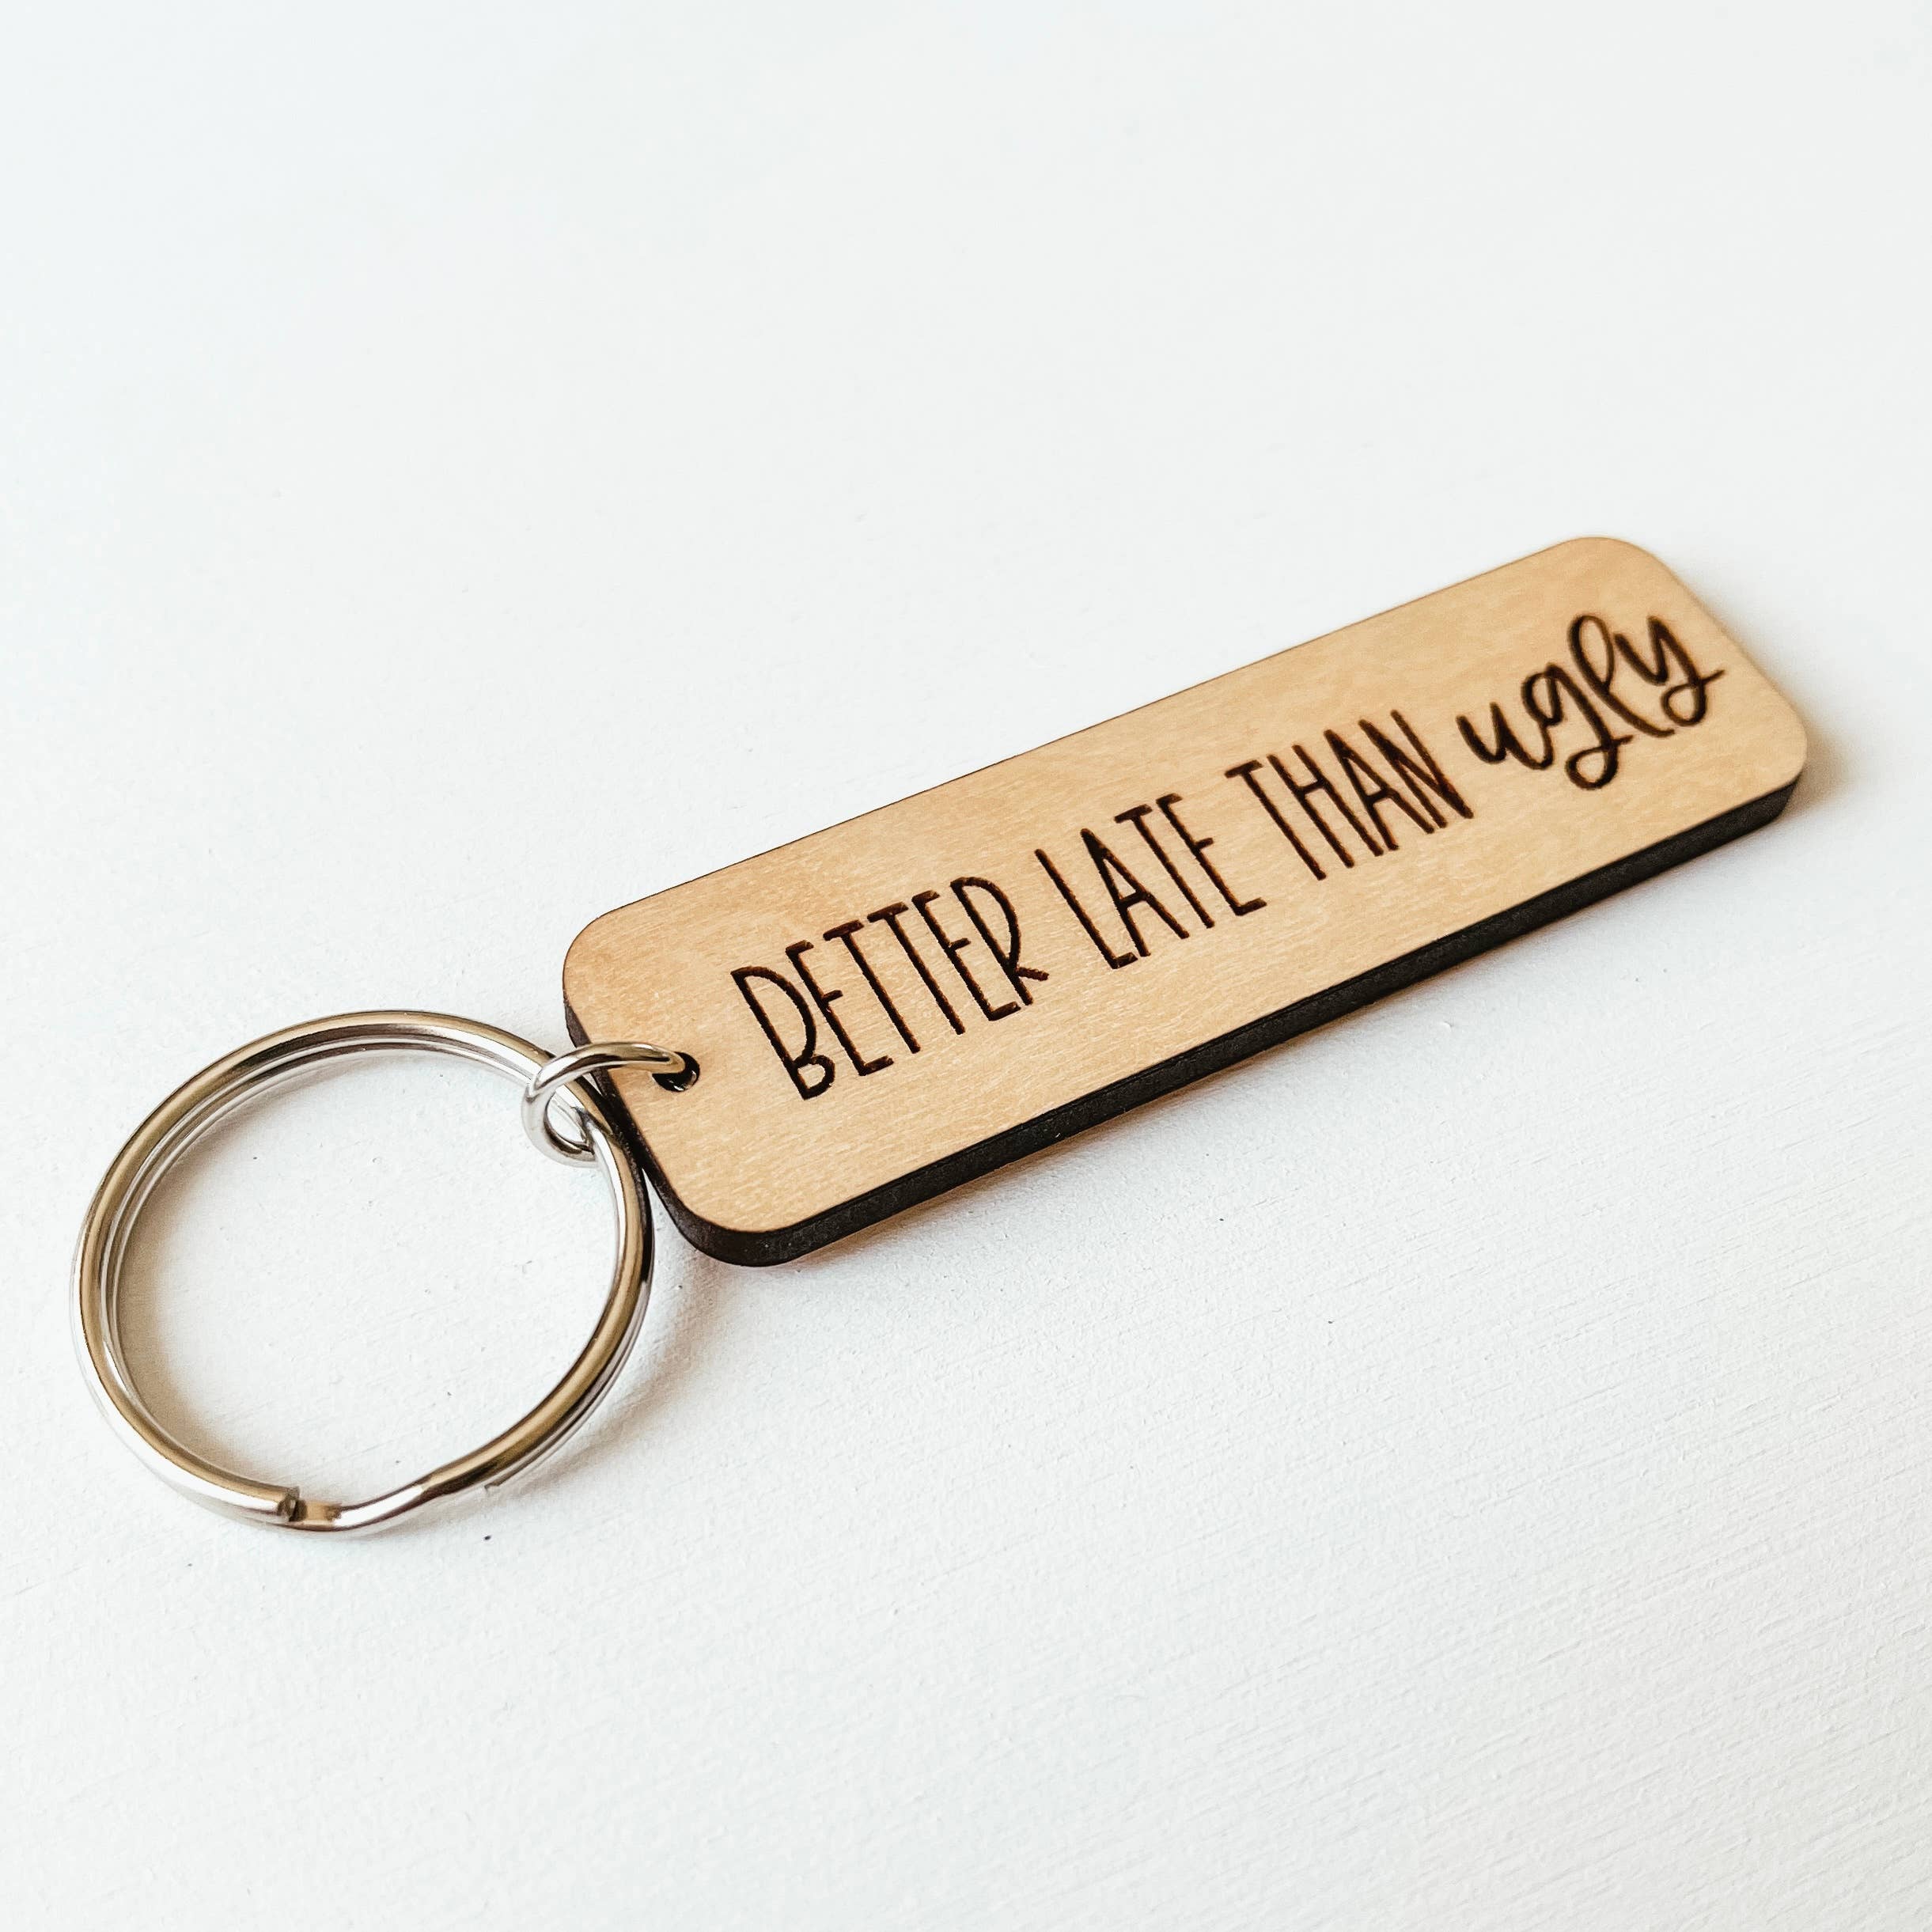 Knotty Design Co. | Better Late Than Ugly Wooden Keychain